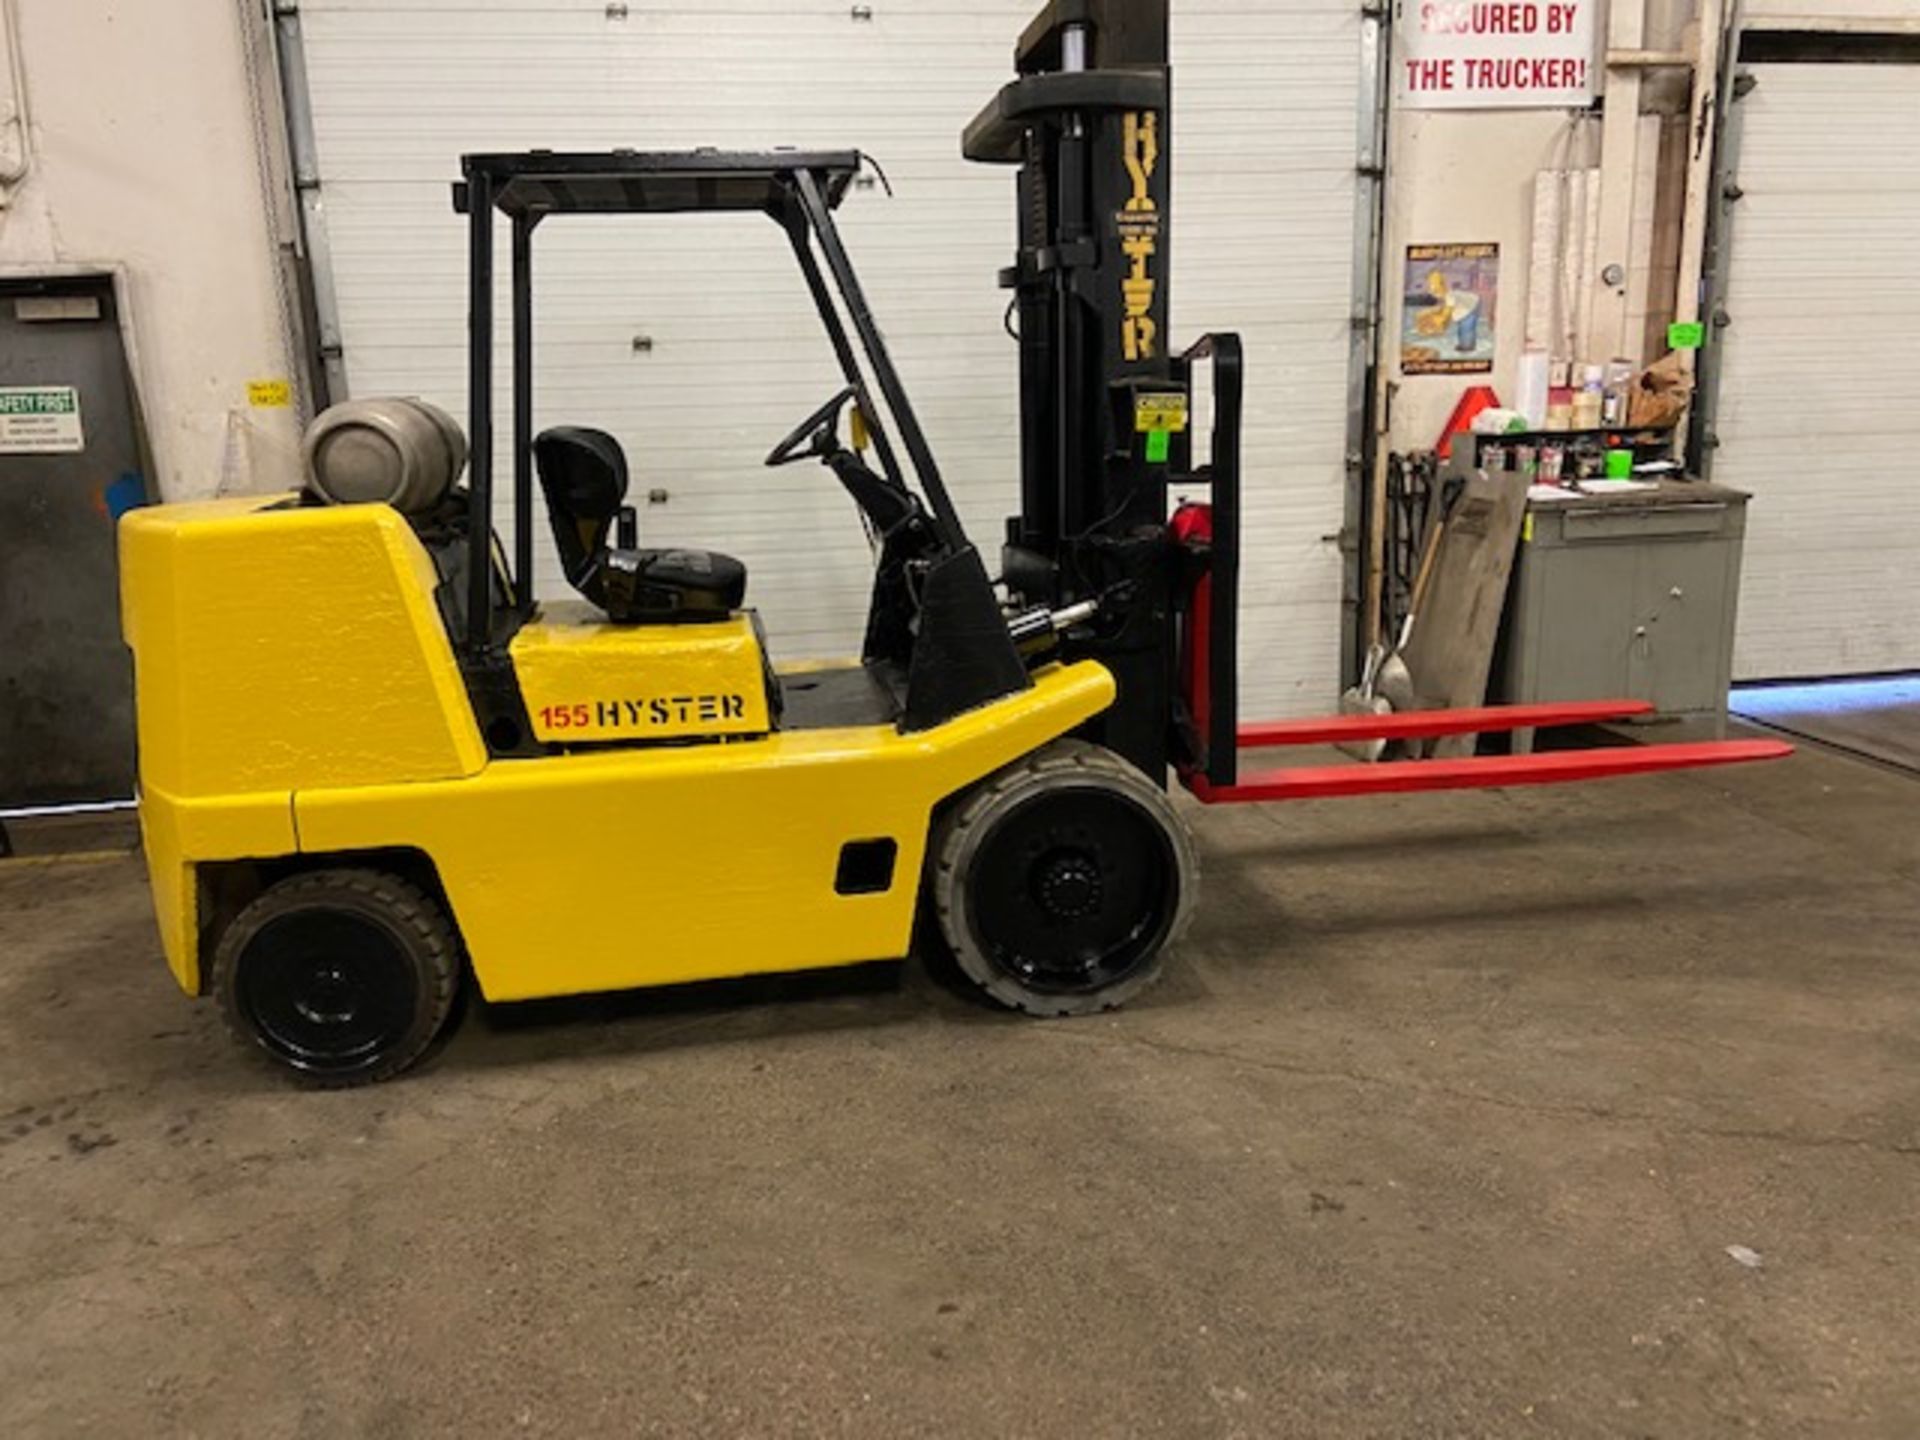 FREE CUSTOMS - Hyster 15500lbs capacity LPG (propane) Forklift with 3-stage mast & (no